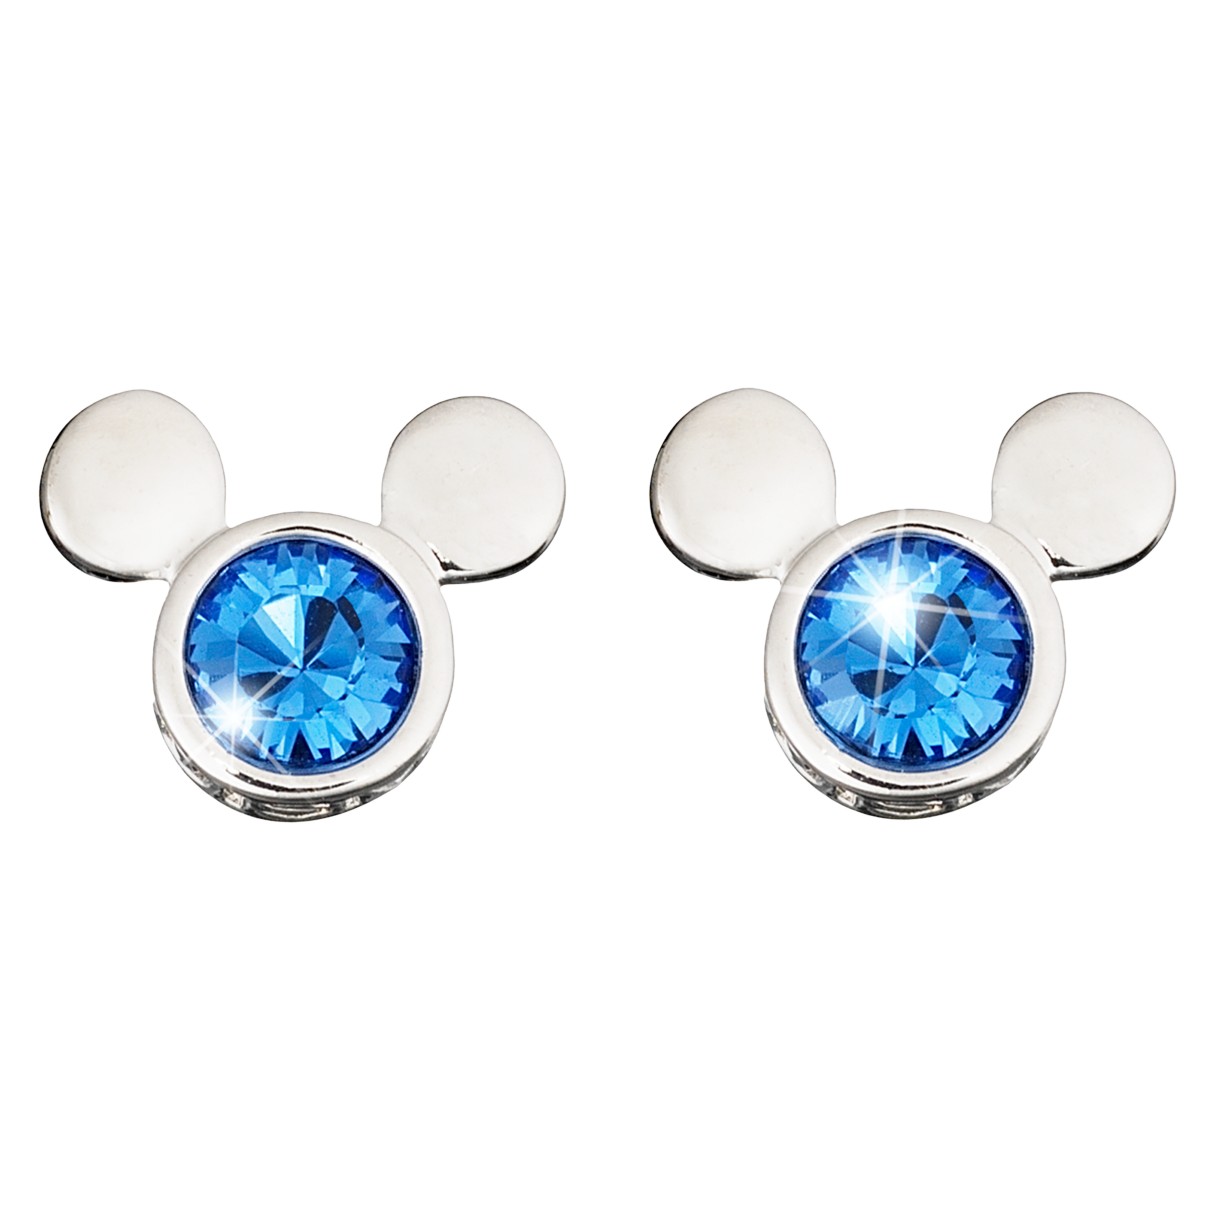 Mickey Mouse Icon Crystal Earrings by Arribas – Blue